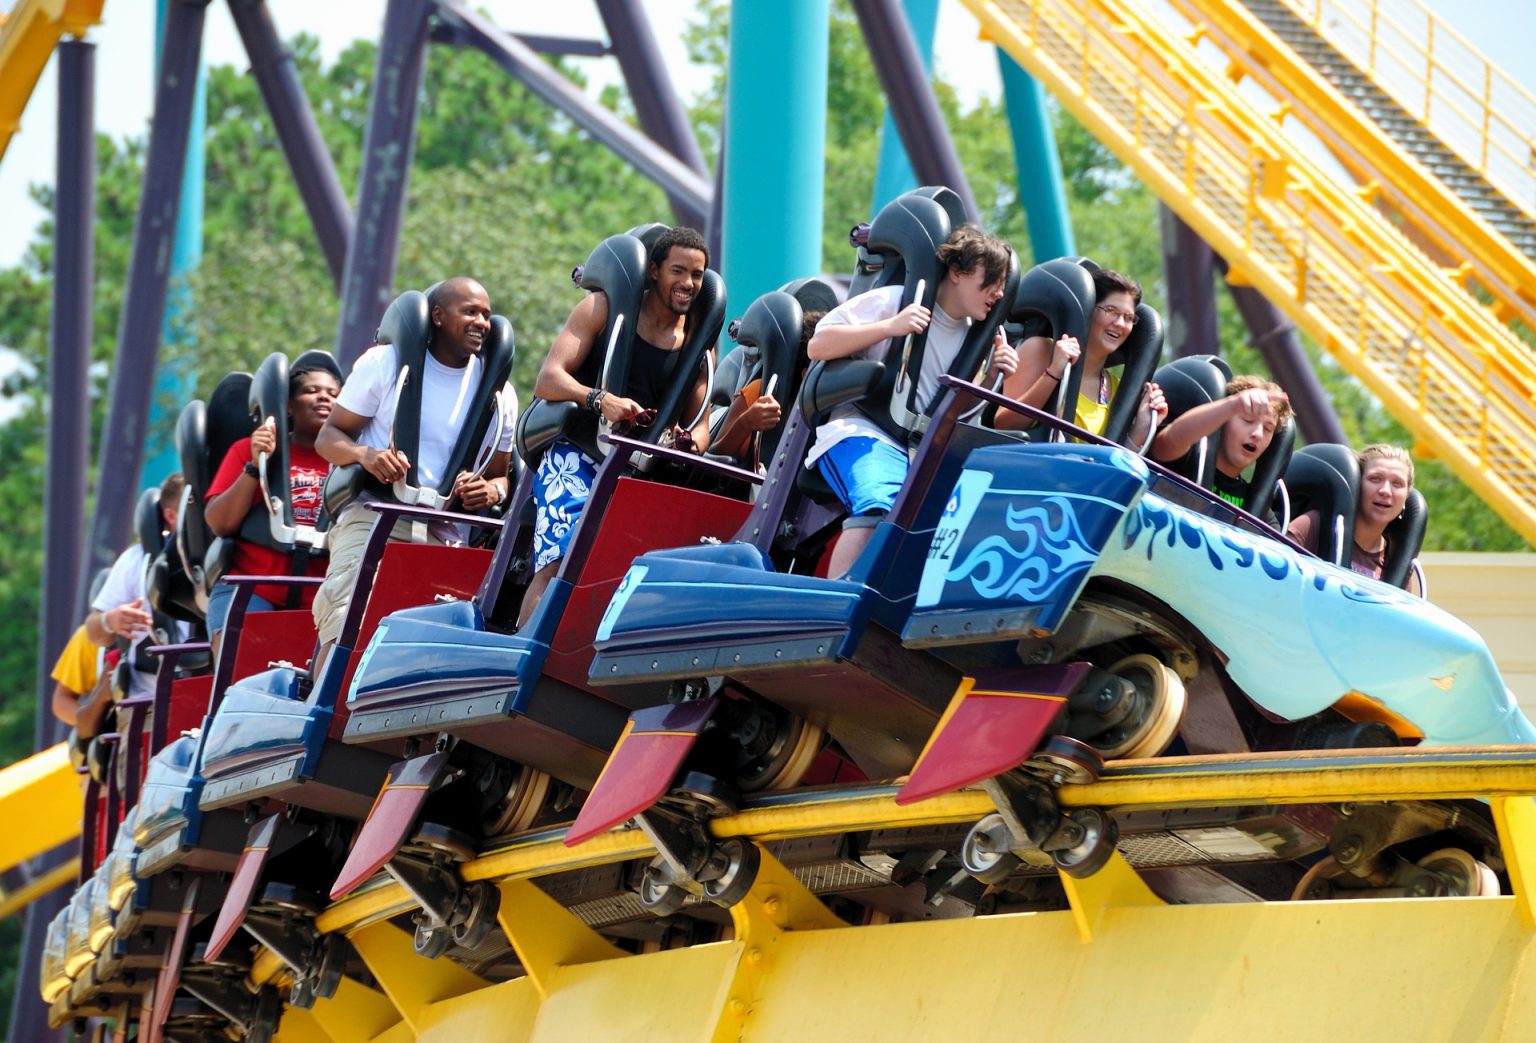 5 Best Theme Parks in San Francisco- Top Rated Theme Parks